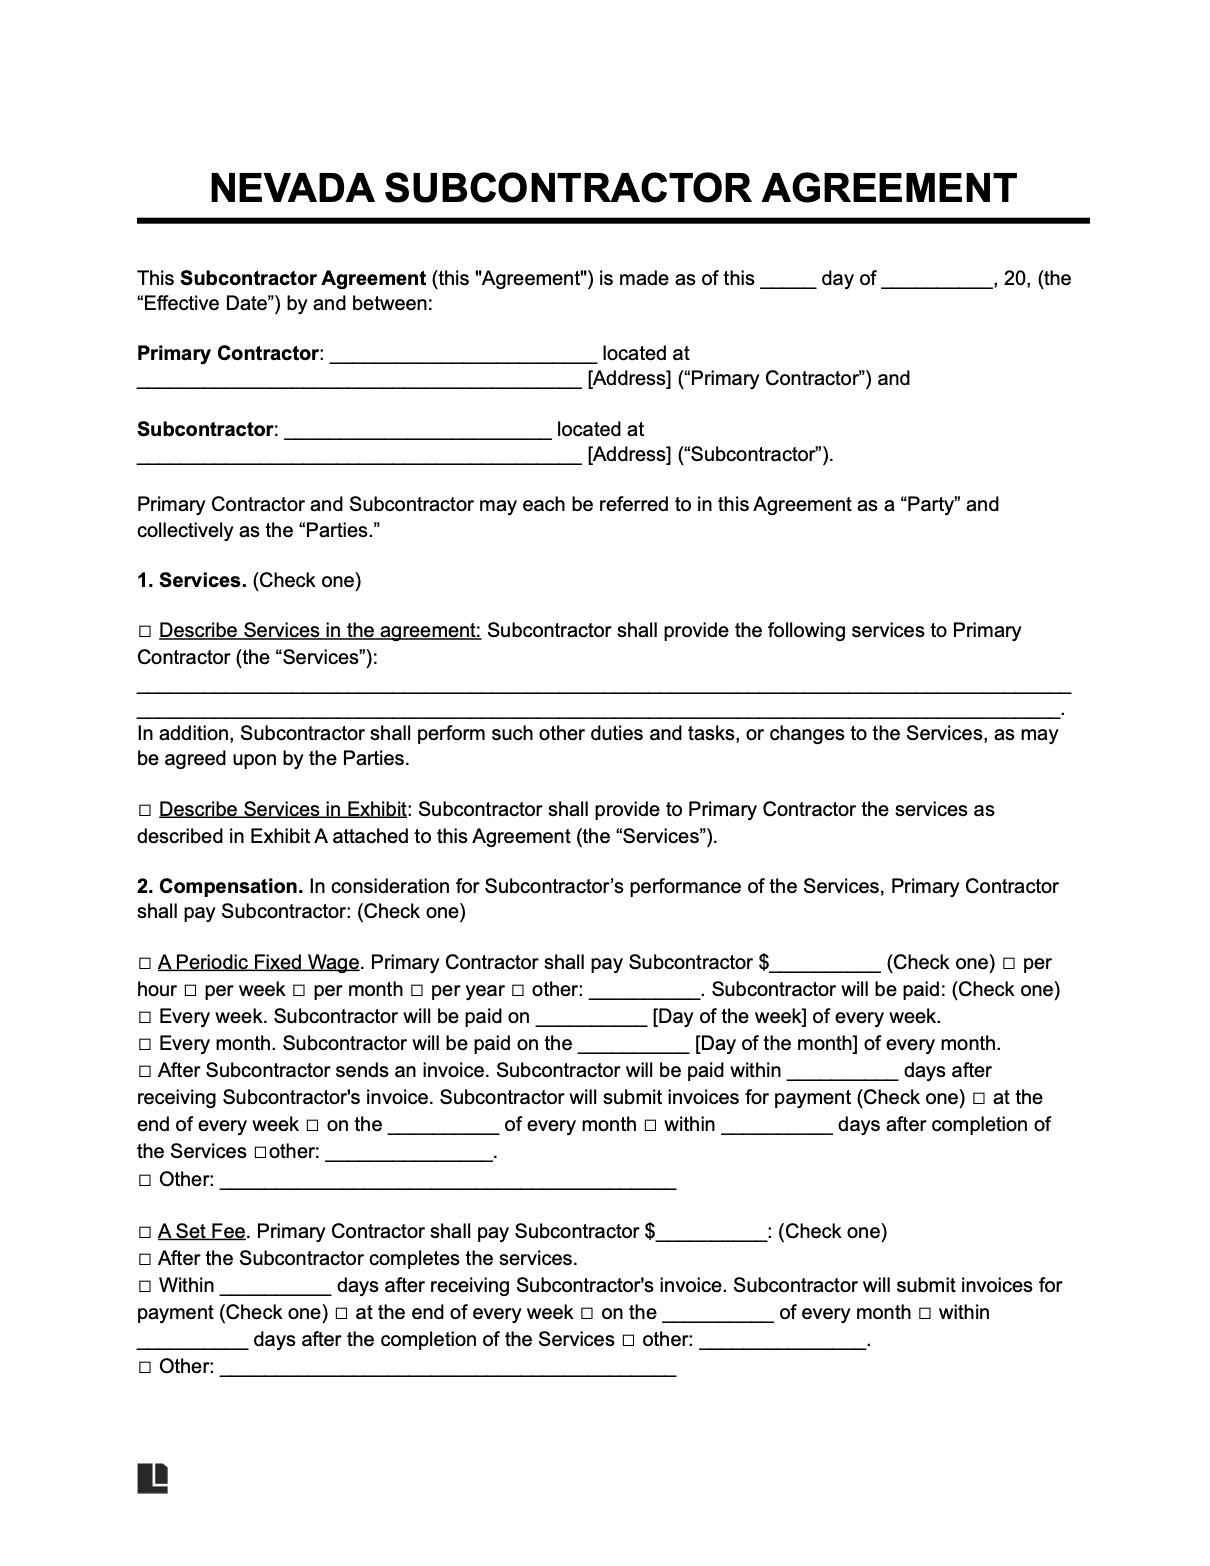 nevada subcontractor agreement template